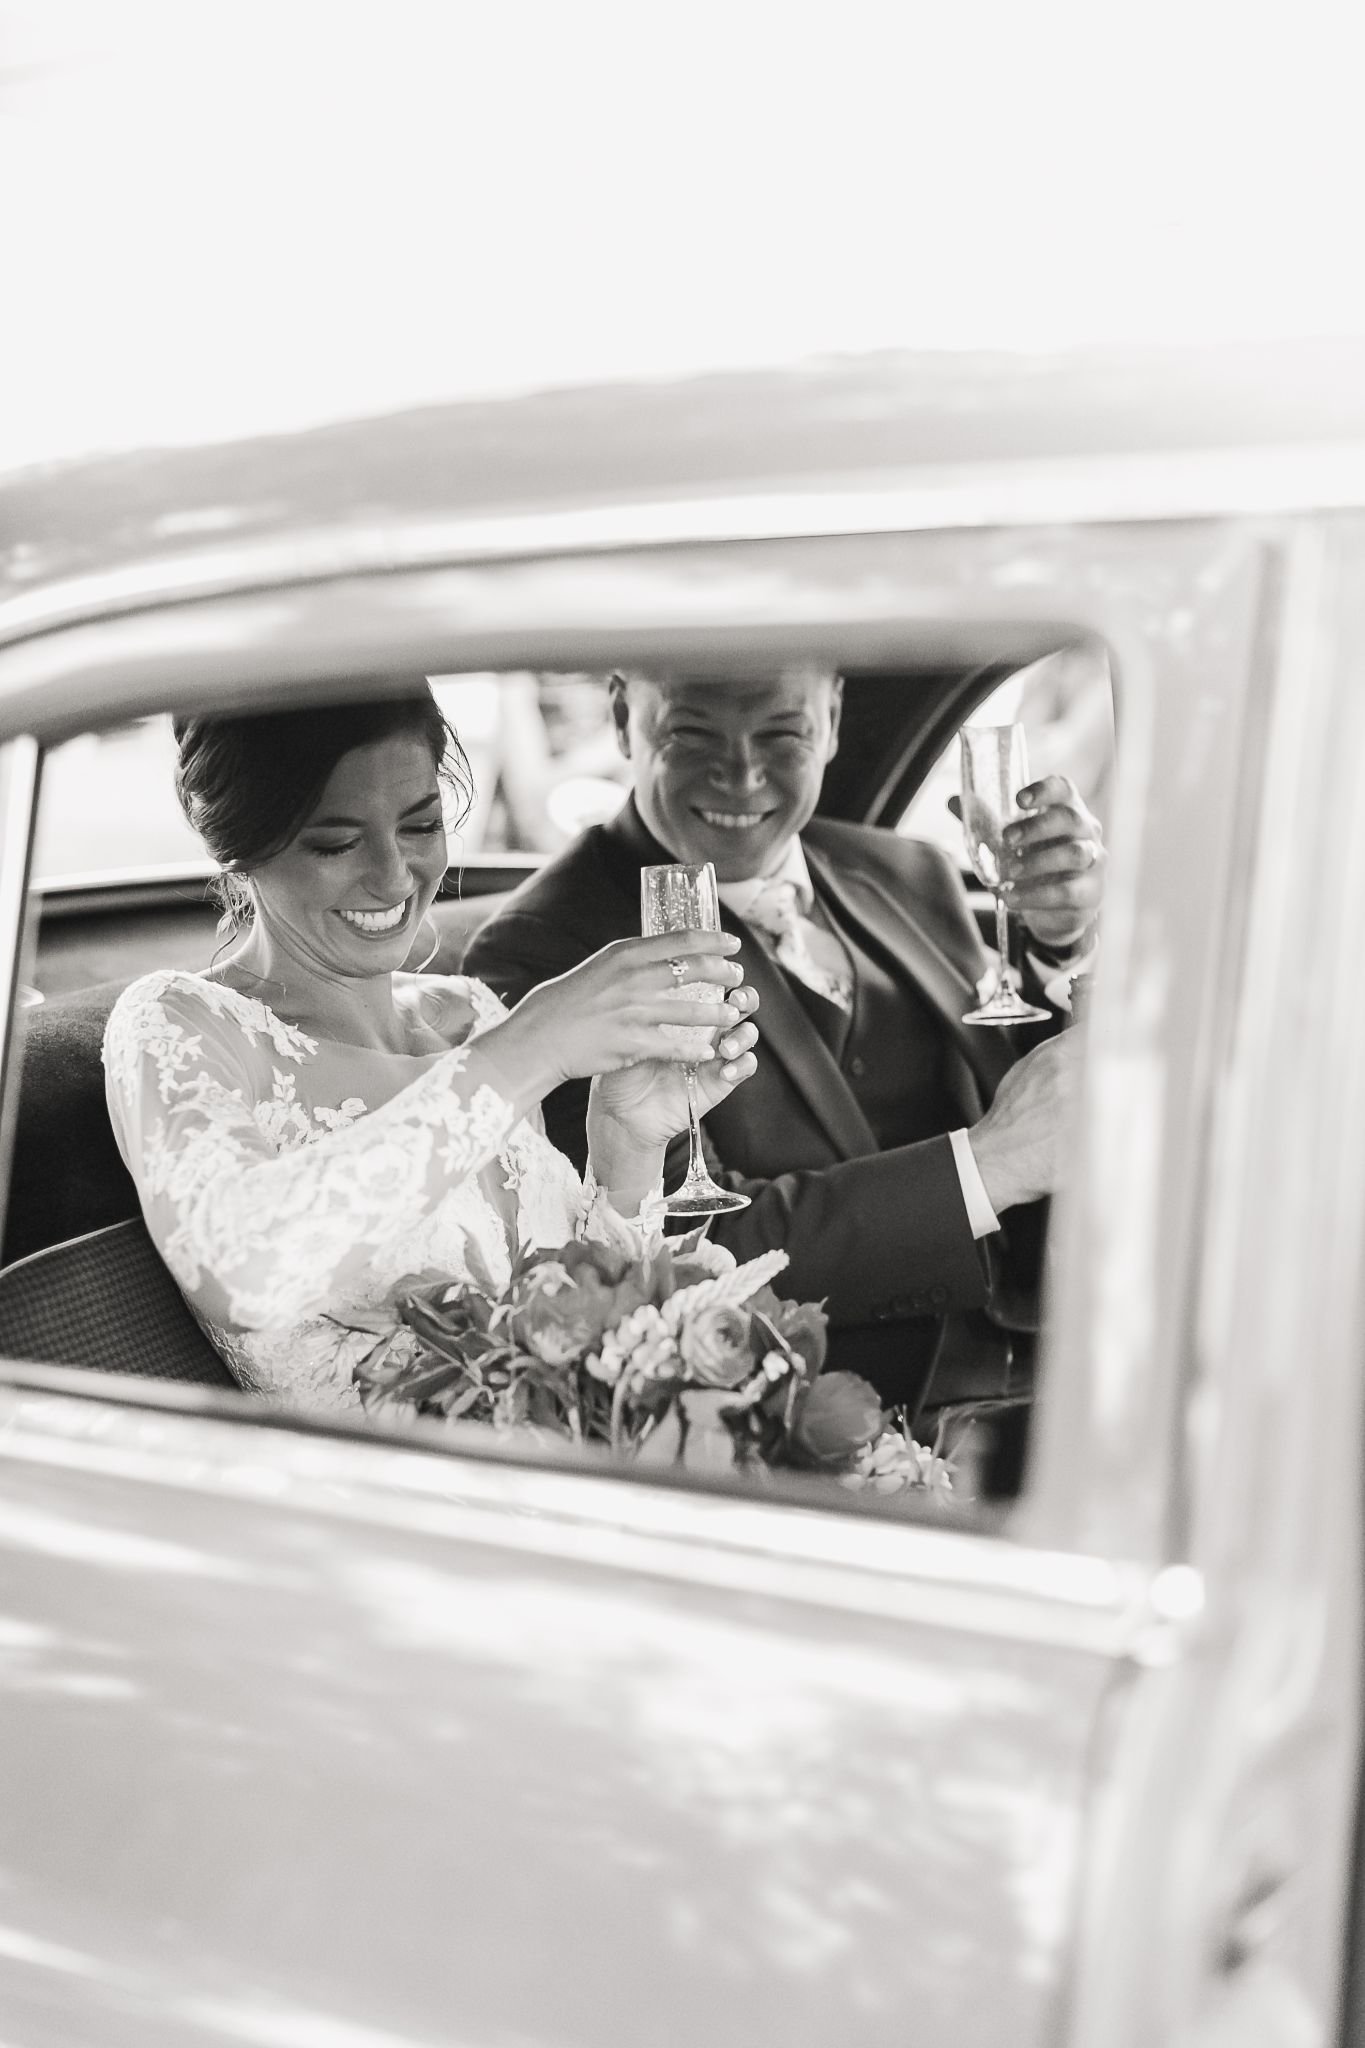 Candid black and white photo by Emi Rose Studio, wedding photographer in Maine